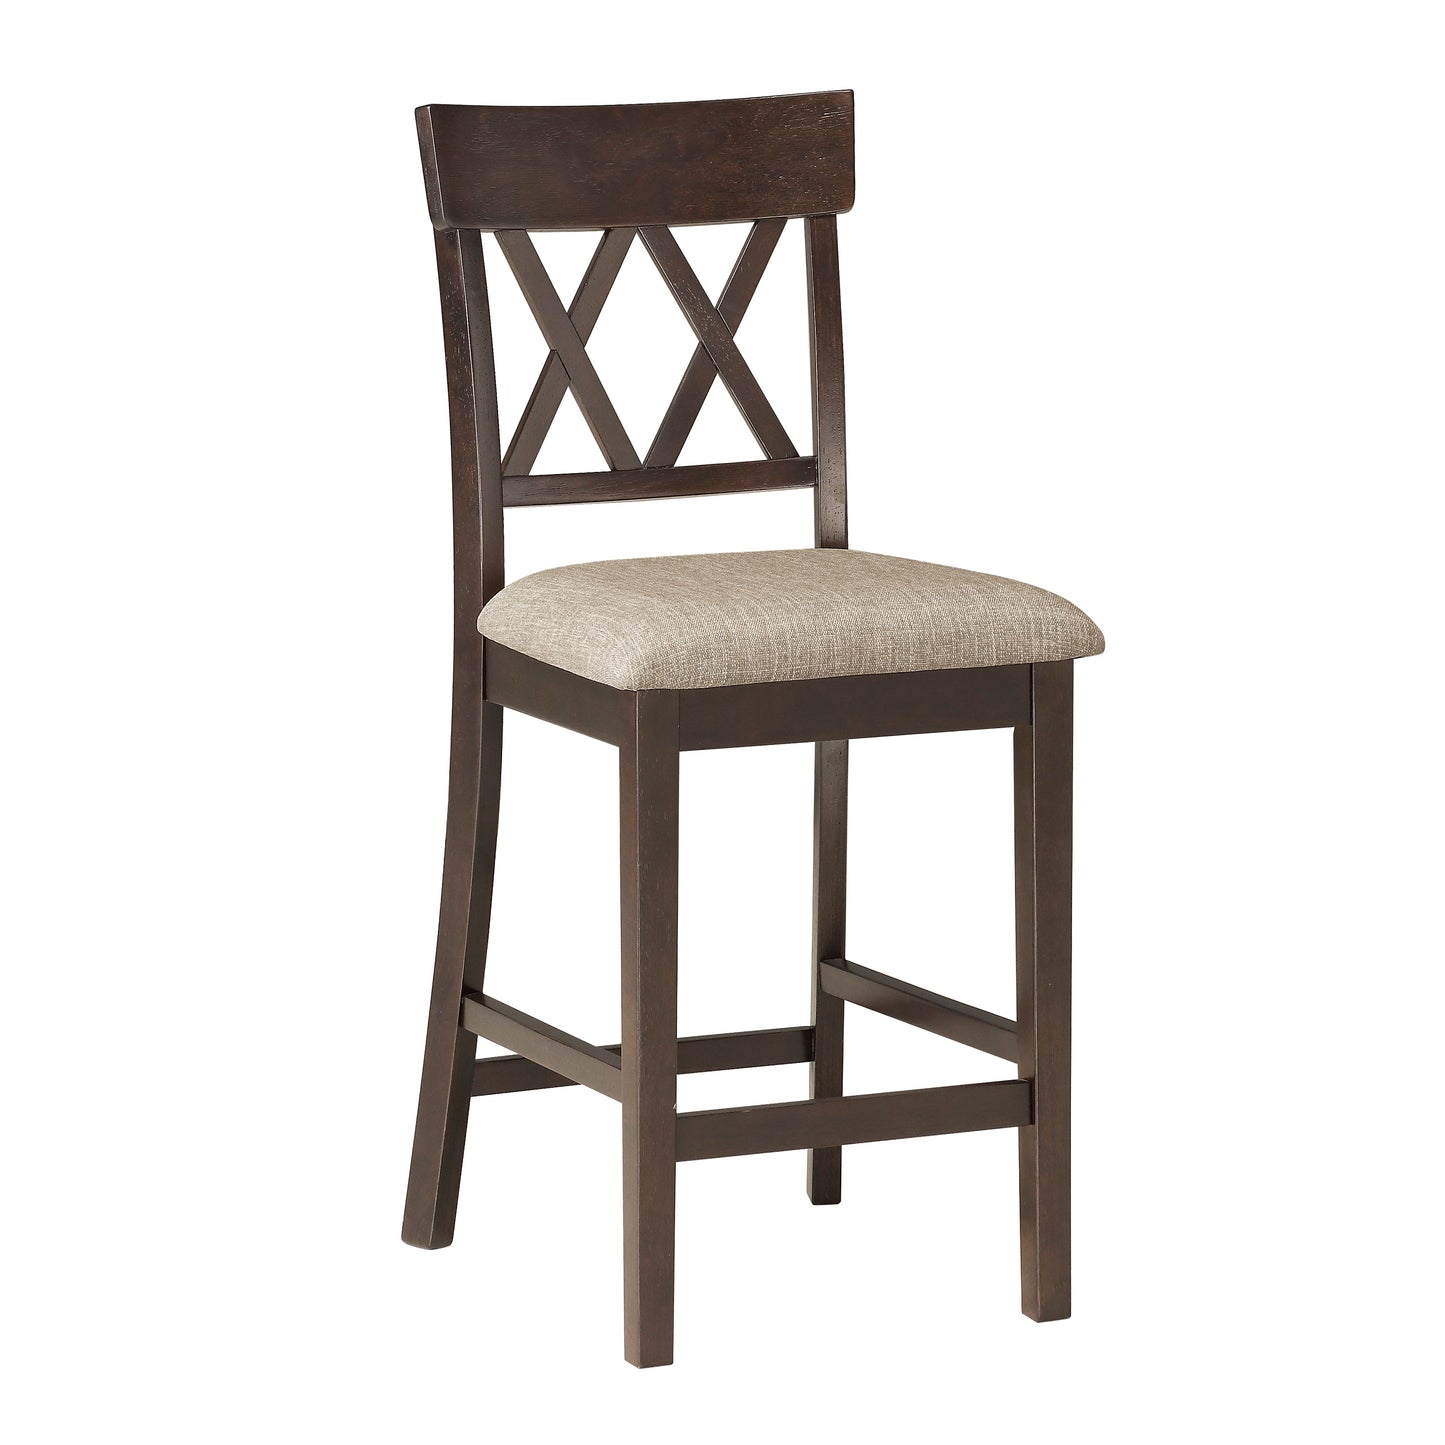 Balin Dark Brown Counter Height Chair, Double X Back, Set of 2